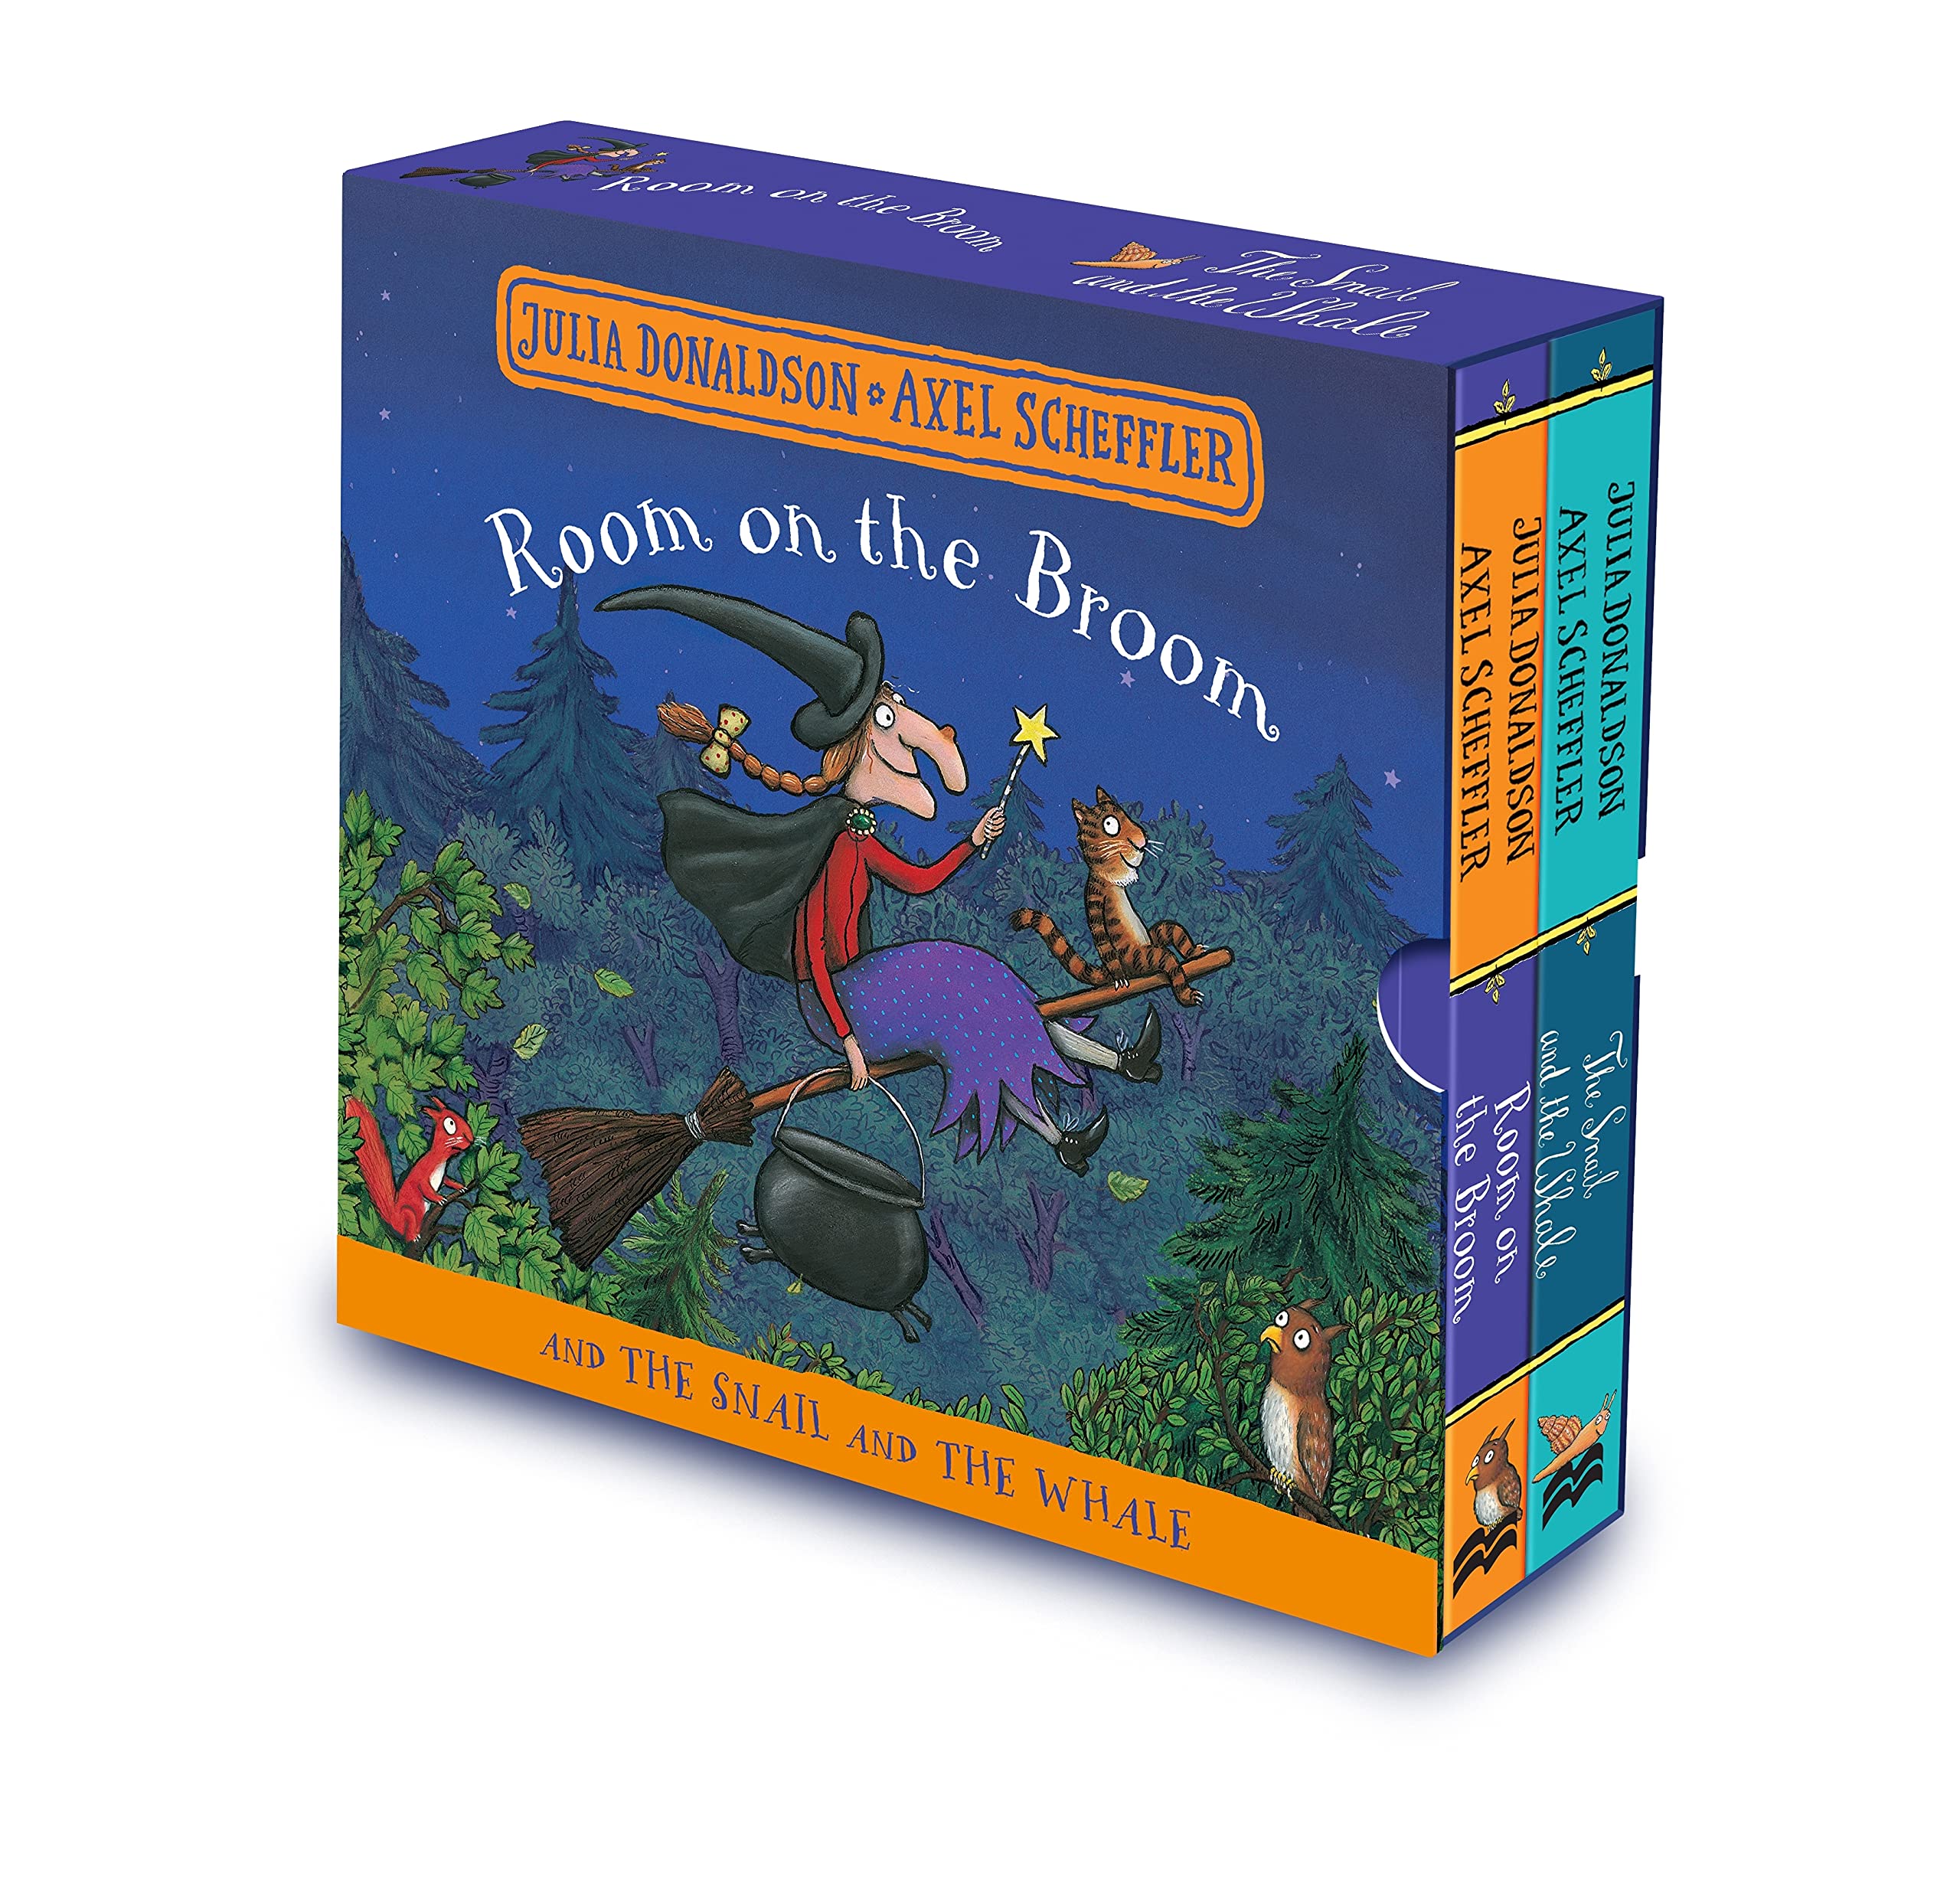 Room on the Broom and The Snail and the Whale (Board Book Gift Slipcase) | Julia Donaldson image0